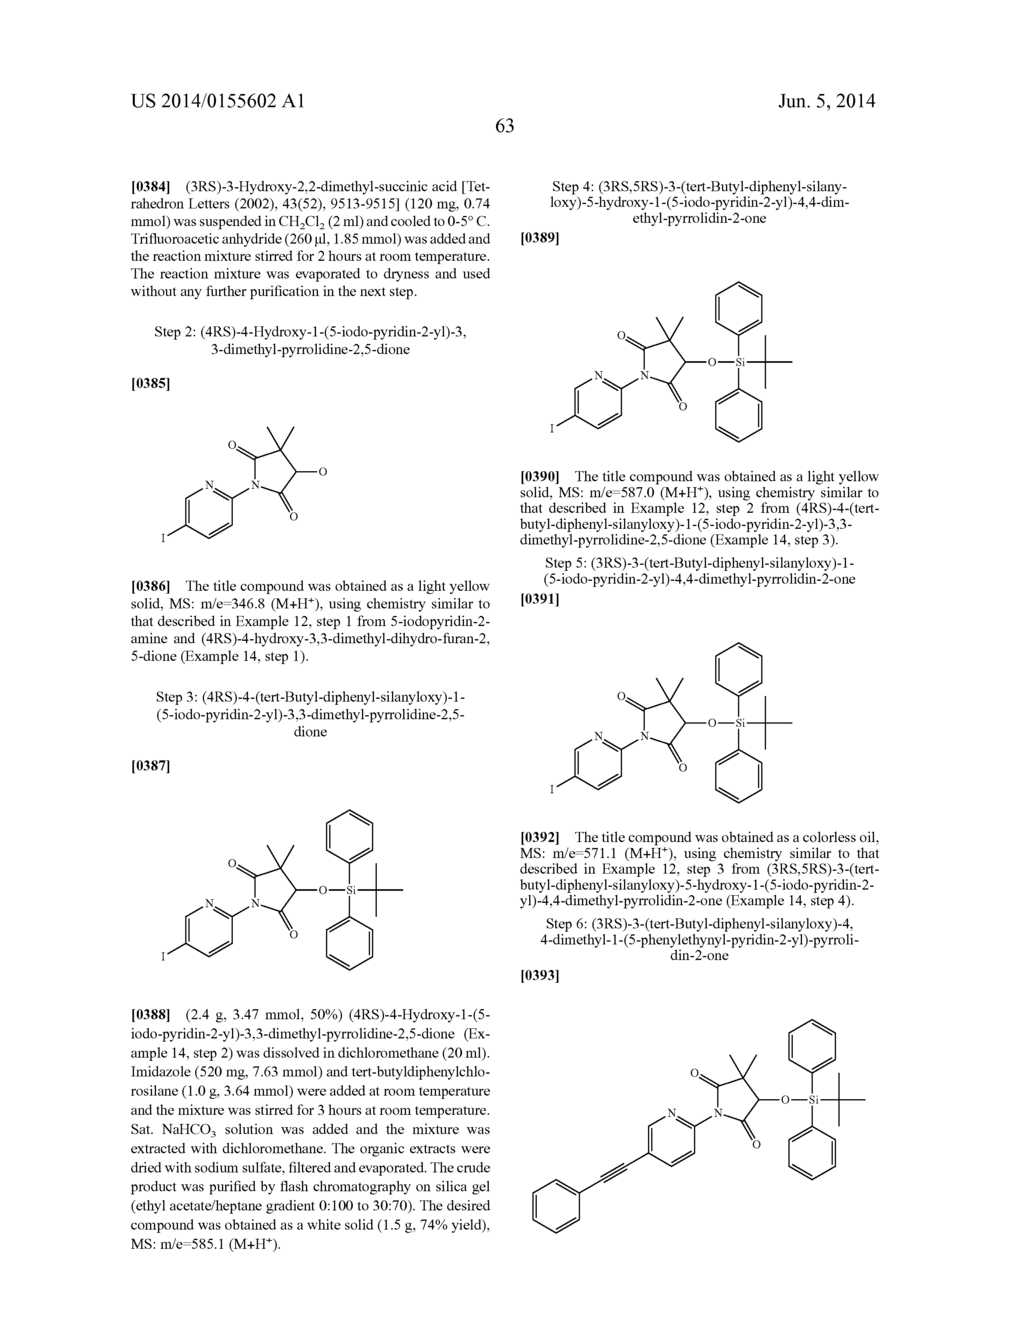 Arlethynyl Derivatives - diagram, schematic, and image 64